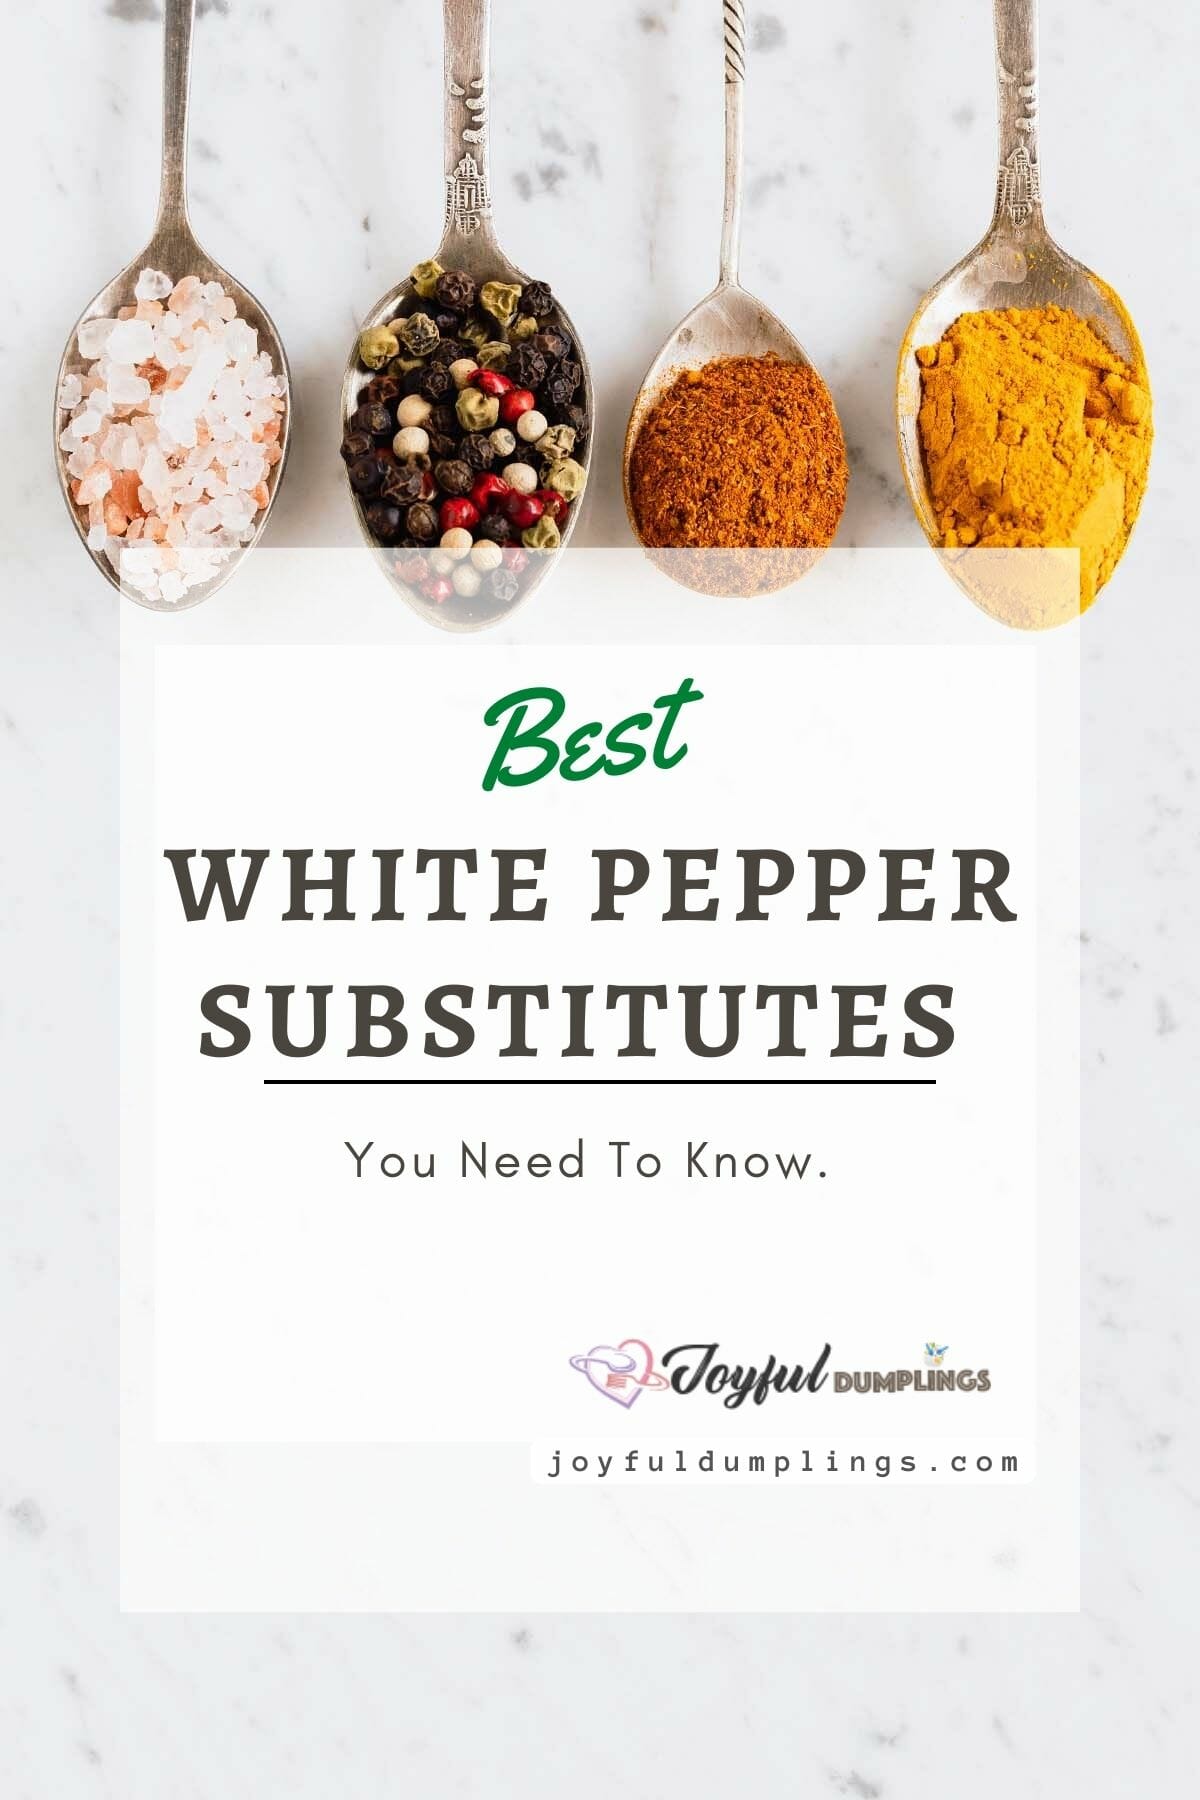 13 Substitutes for White Pepper